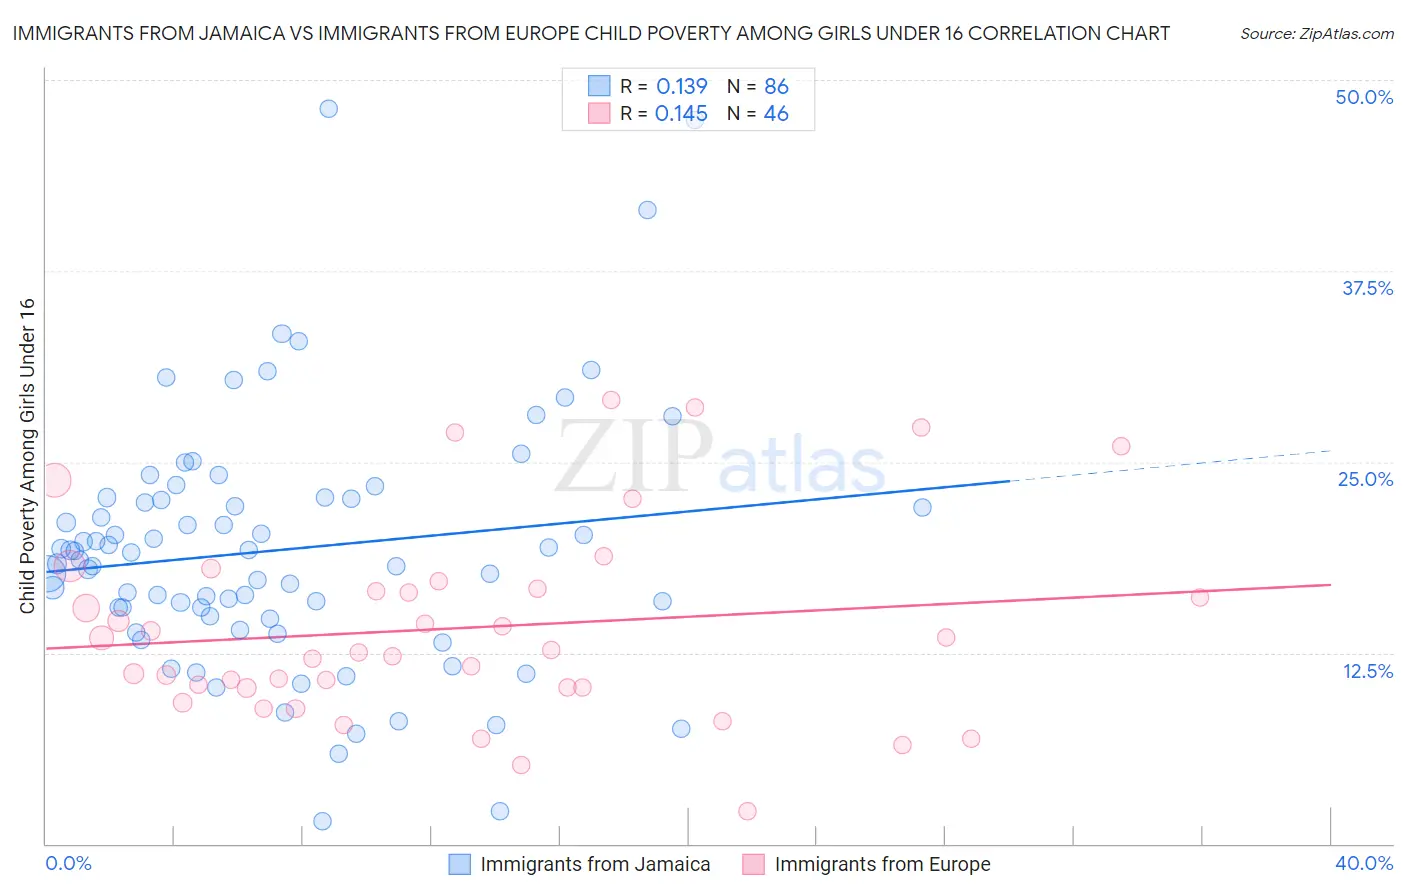 Immigrants from Jamaica vs Immigrants from Europe Child Poverty Among Girls Under 16